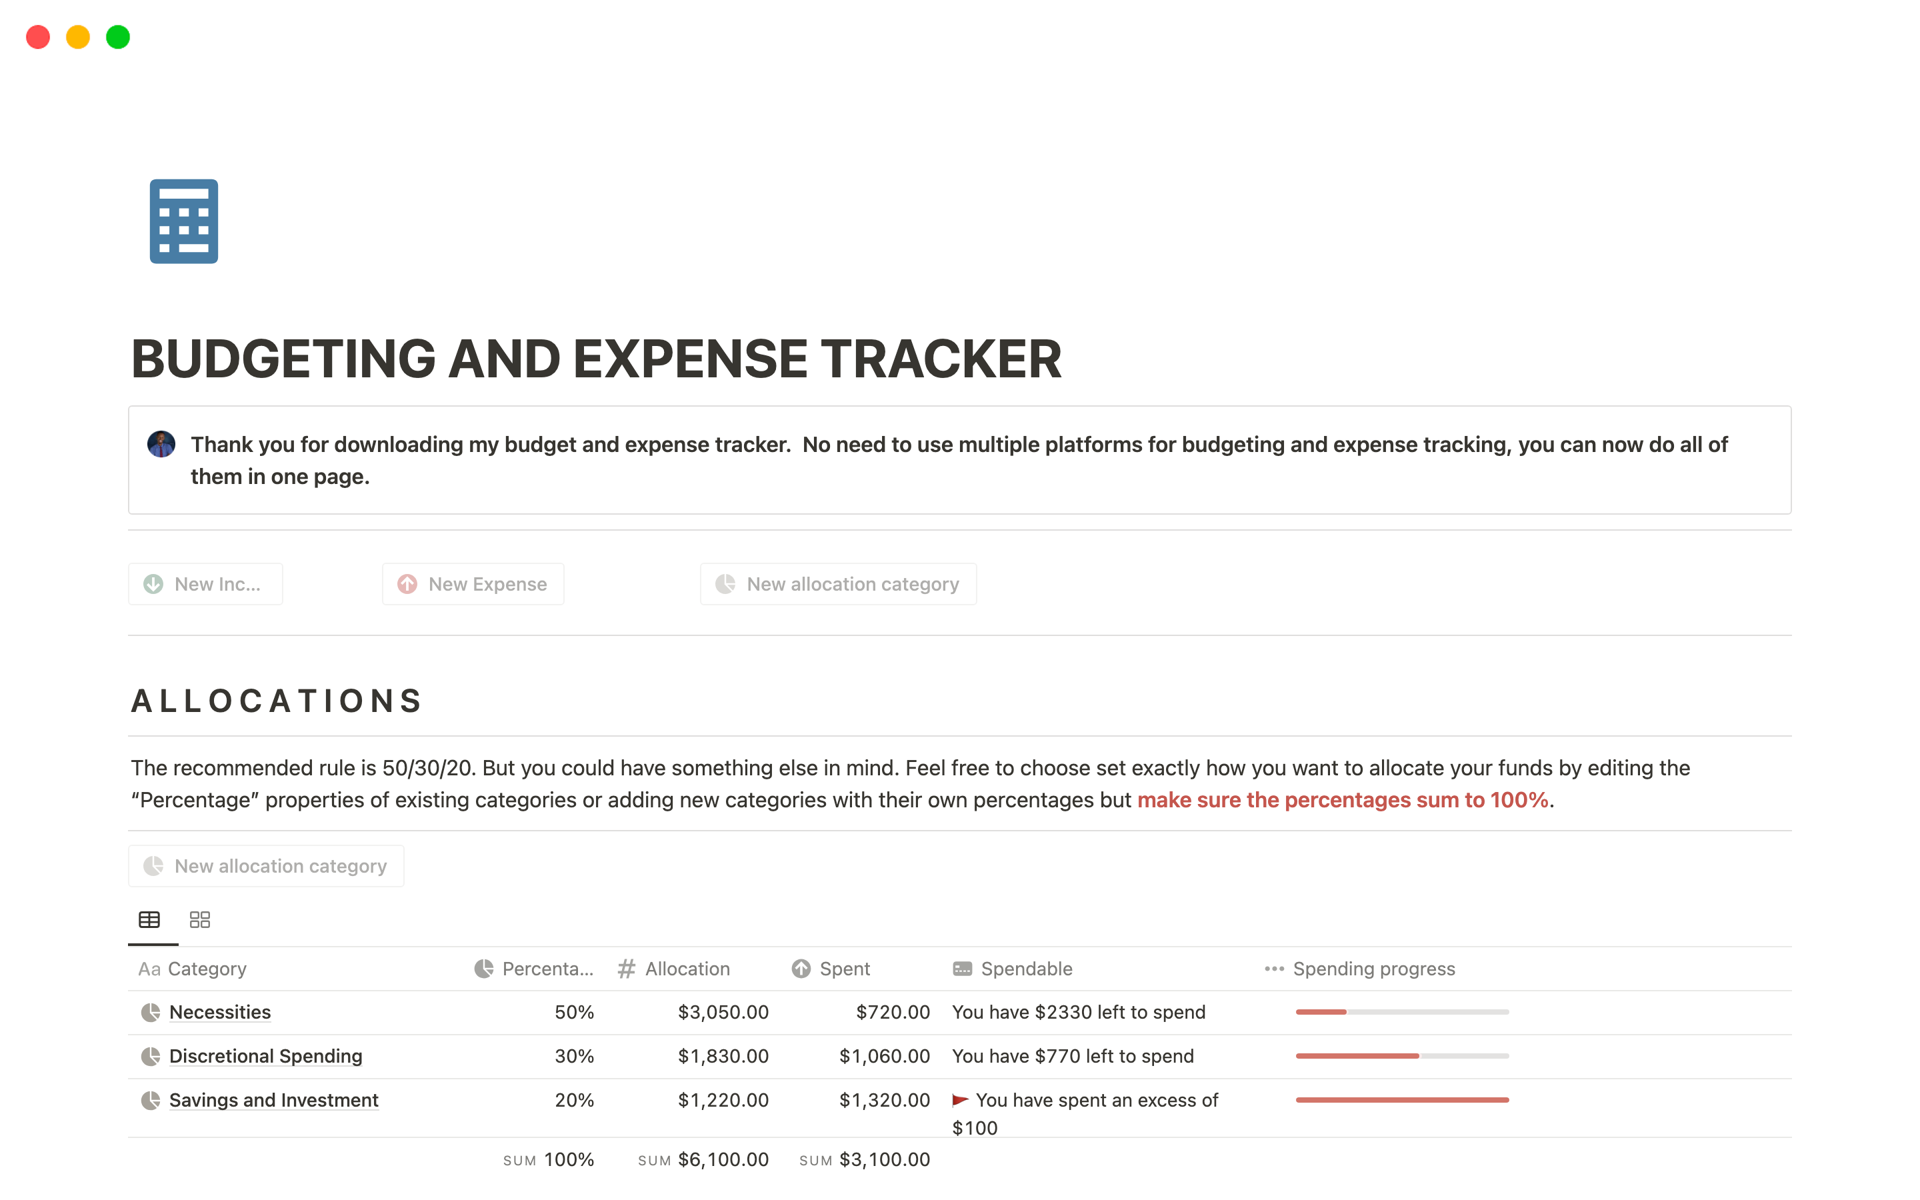 An easy-to-use budgeting and expense tracker template that helps you manage your finances realistically. Track expenses, set budgets, and achieve financial stability effortlessly.